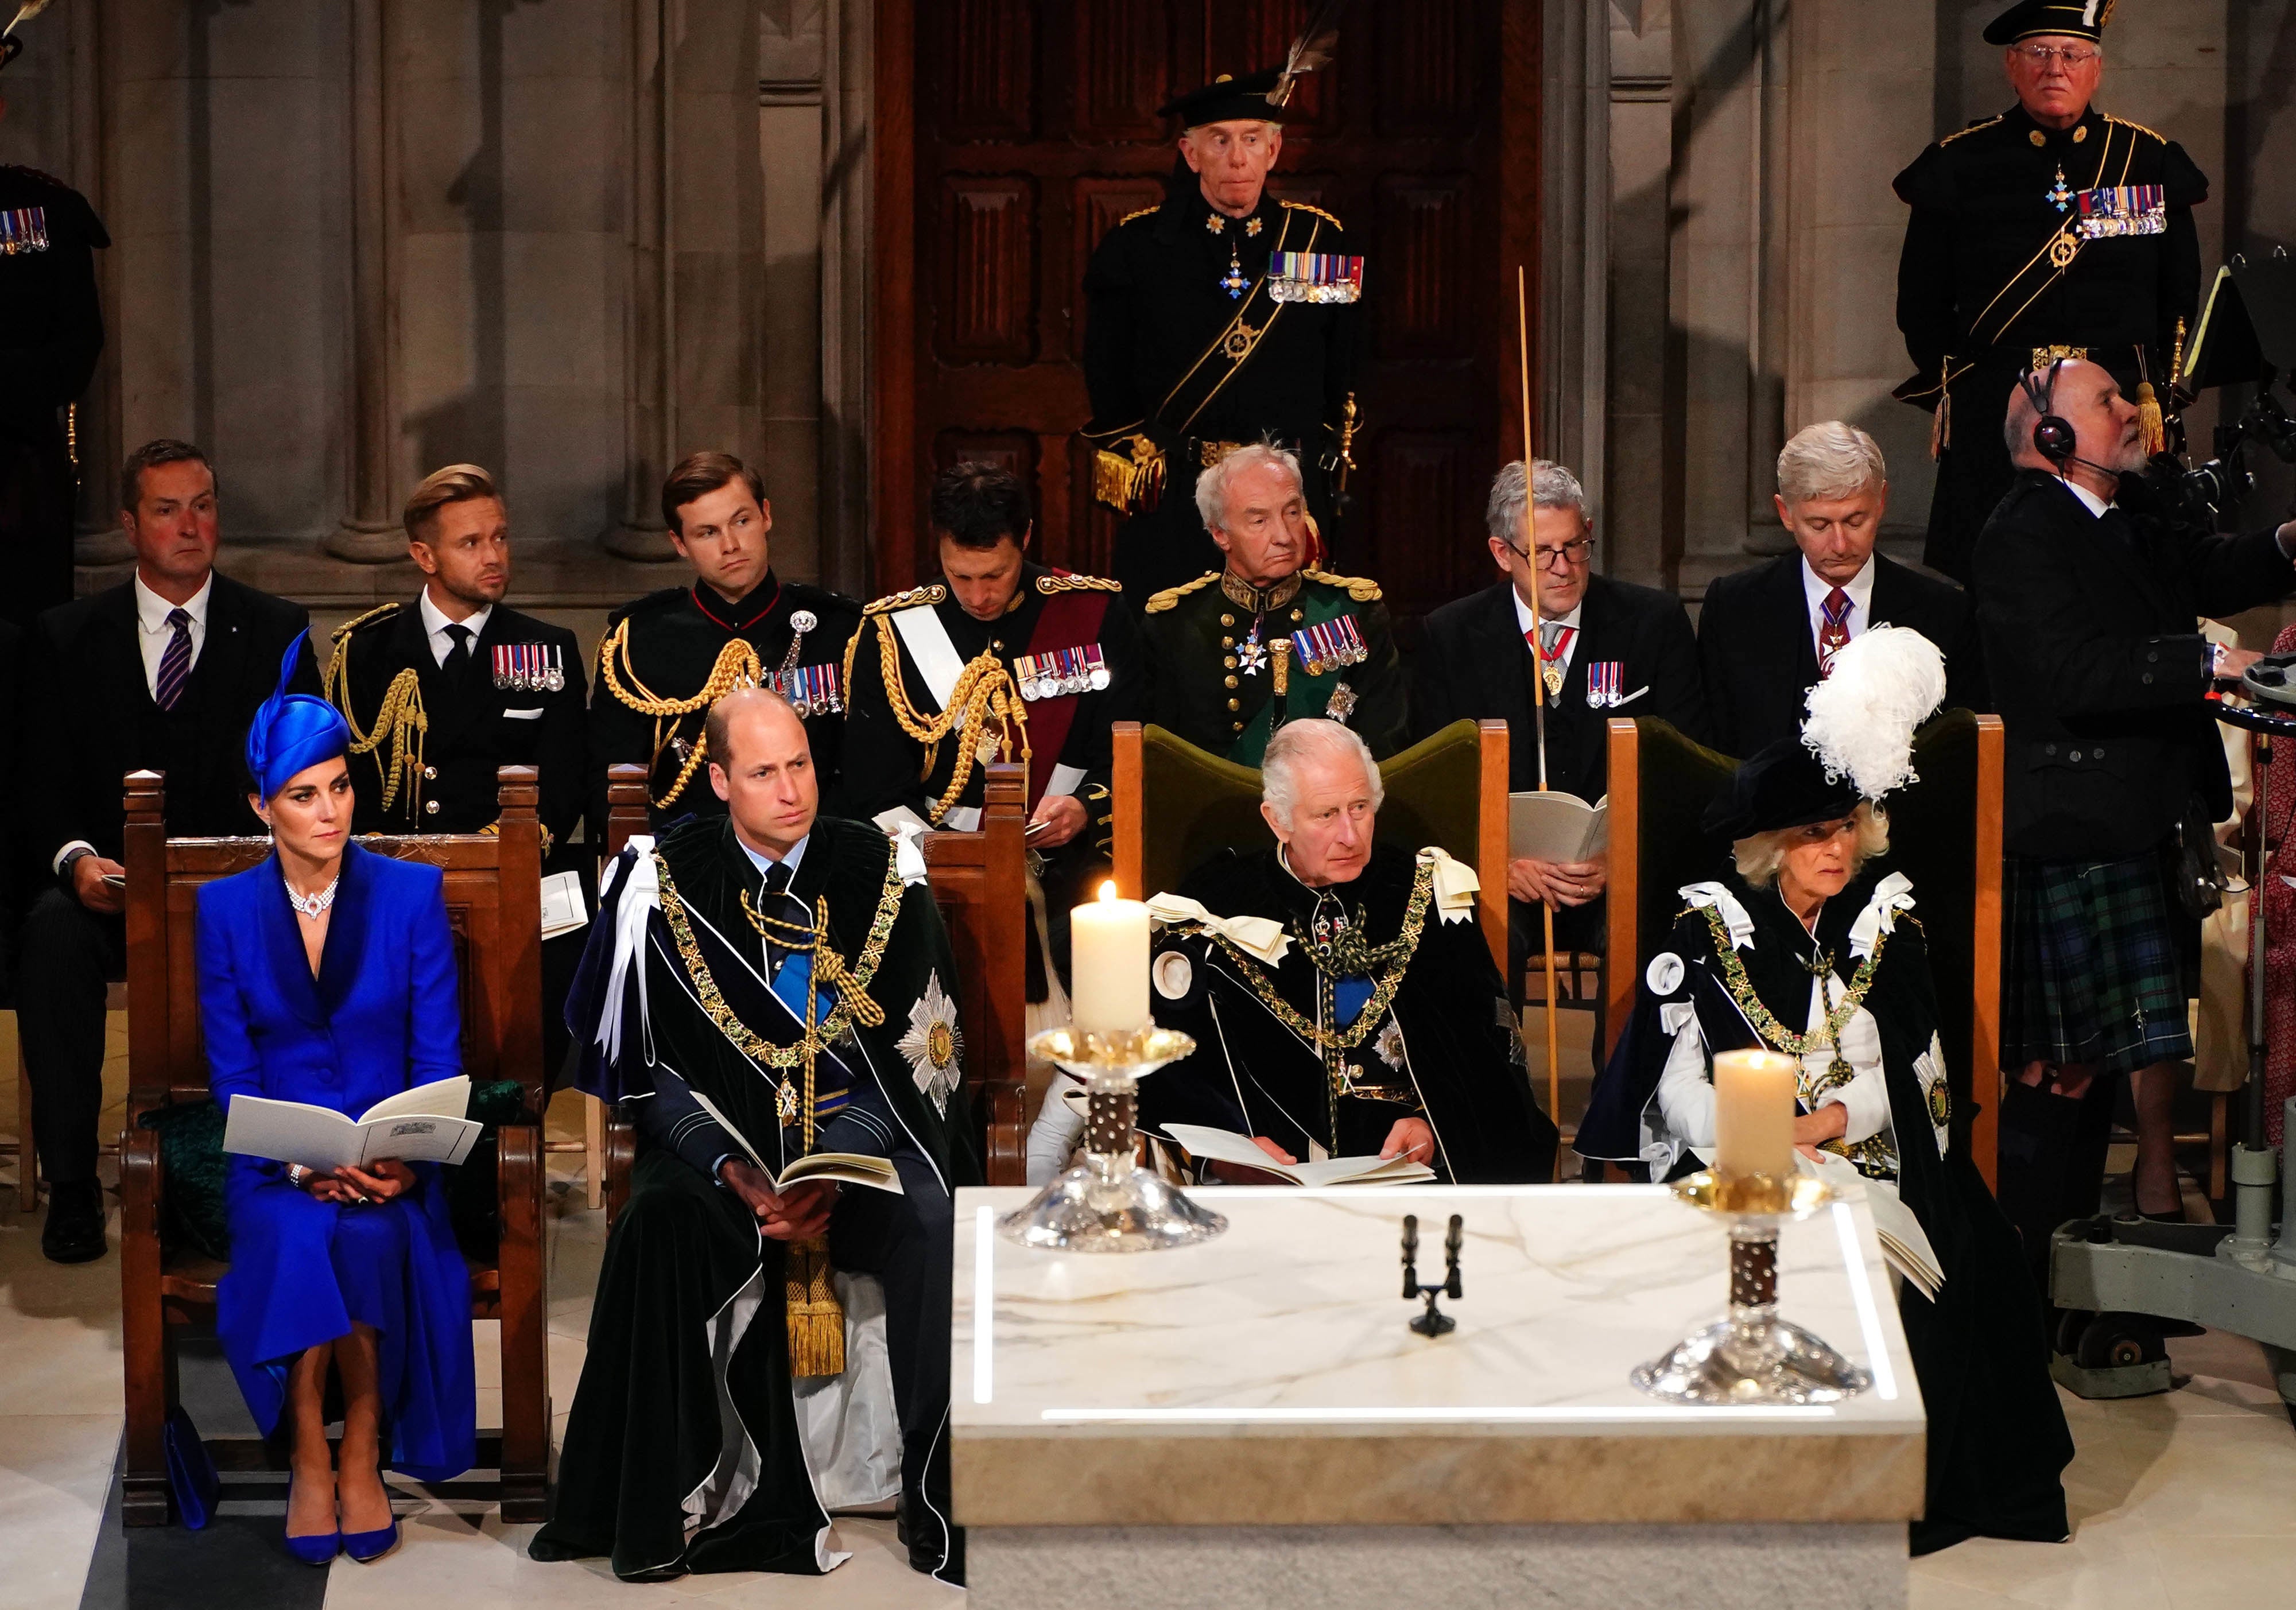 The Princess of Wales and the Prince of Wales known as the Duke and Duchess of Rothesay while in Scotland, King Charles III and Queen Camilla during the National Service of Thanksgiving and Dedication